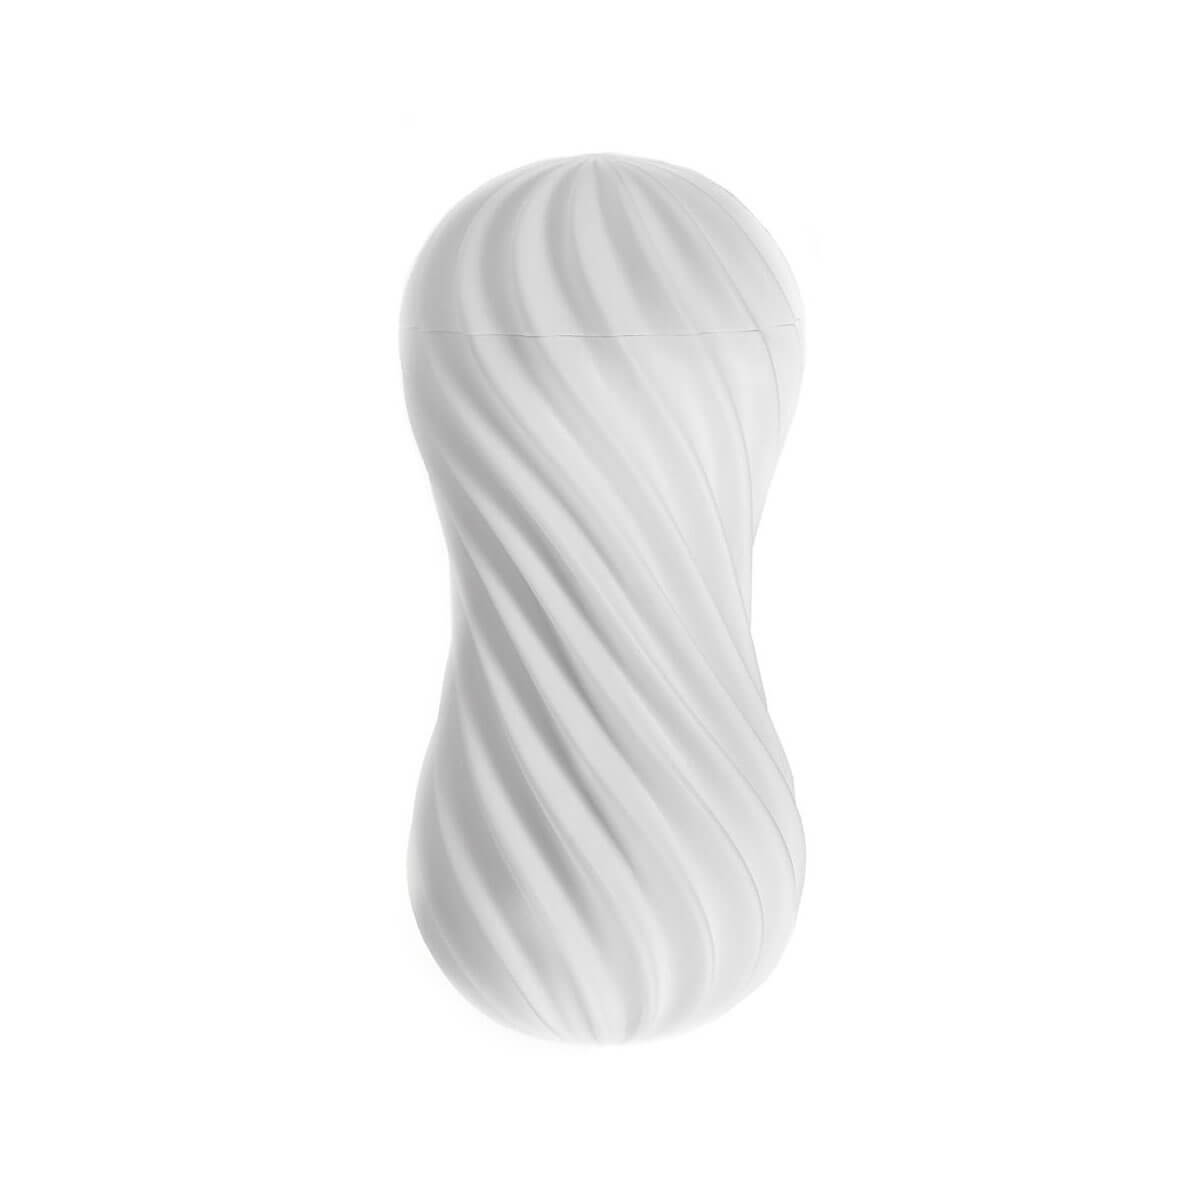 White penis masturbation sleeve with spiral-ribbed casing Nudie Co